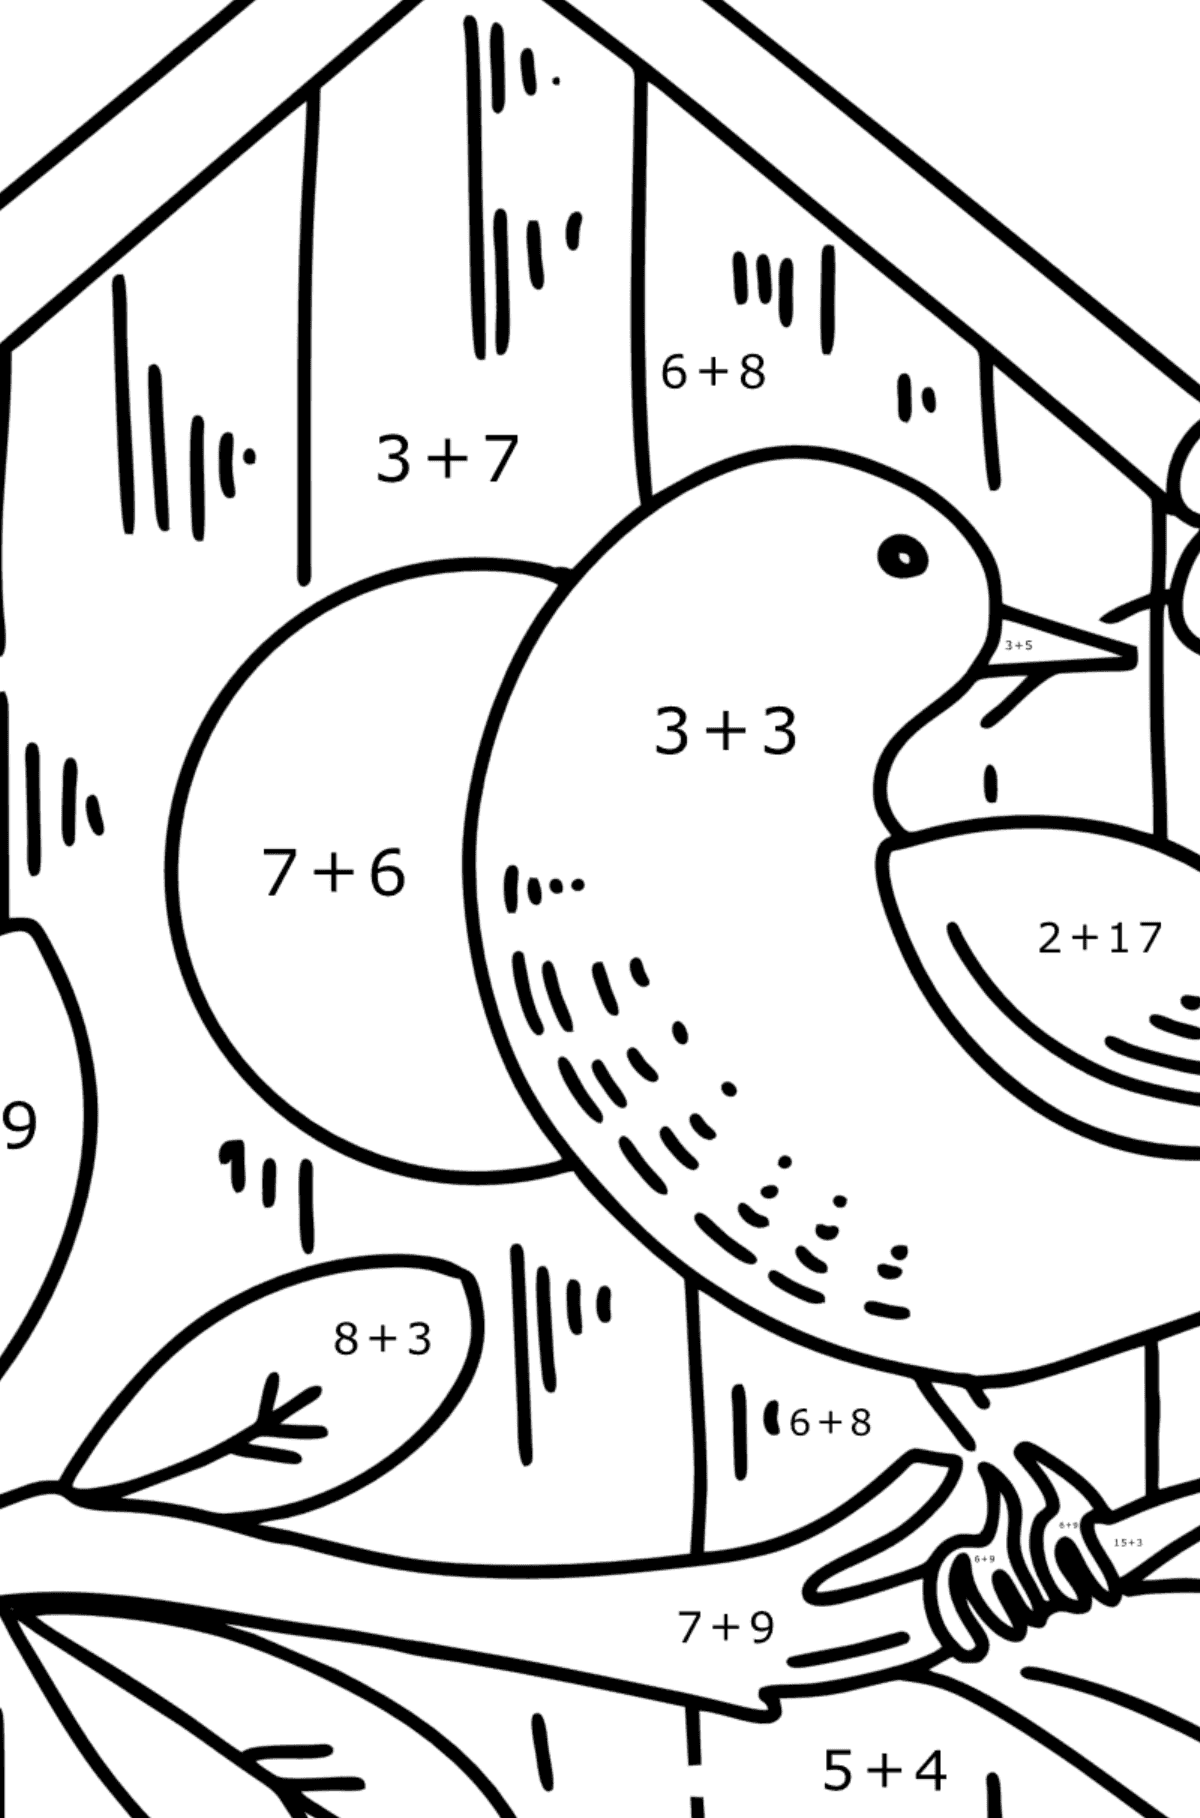 Starling at the Birdhouse coloring page - Math Coloring - Addition for Kids